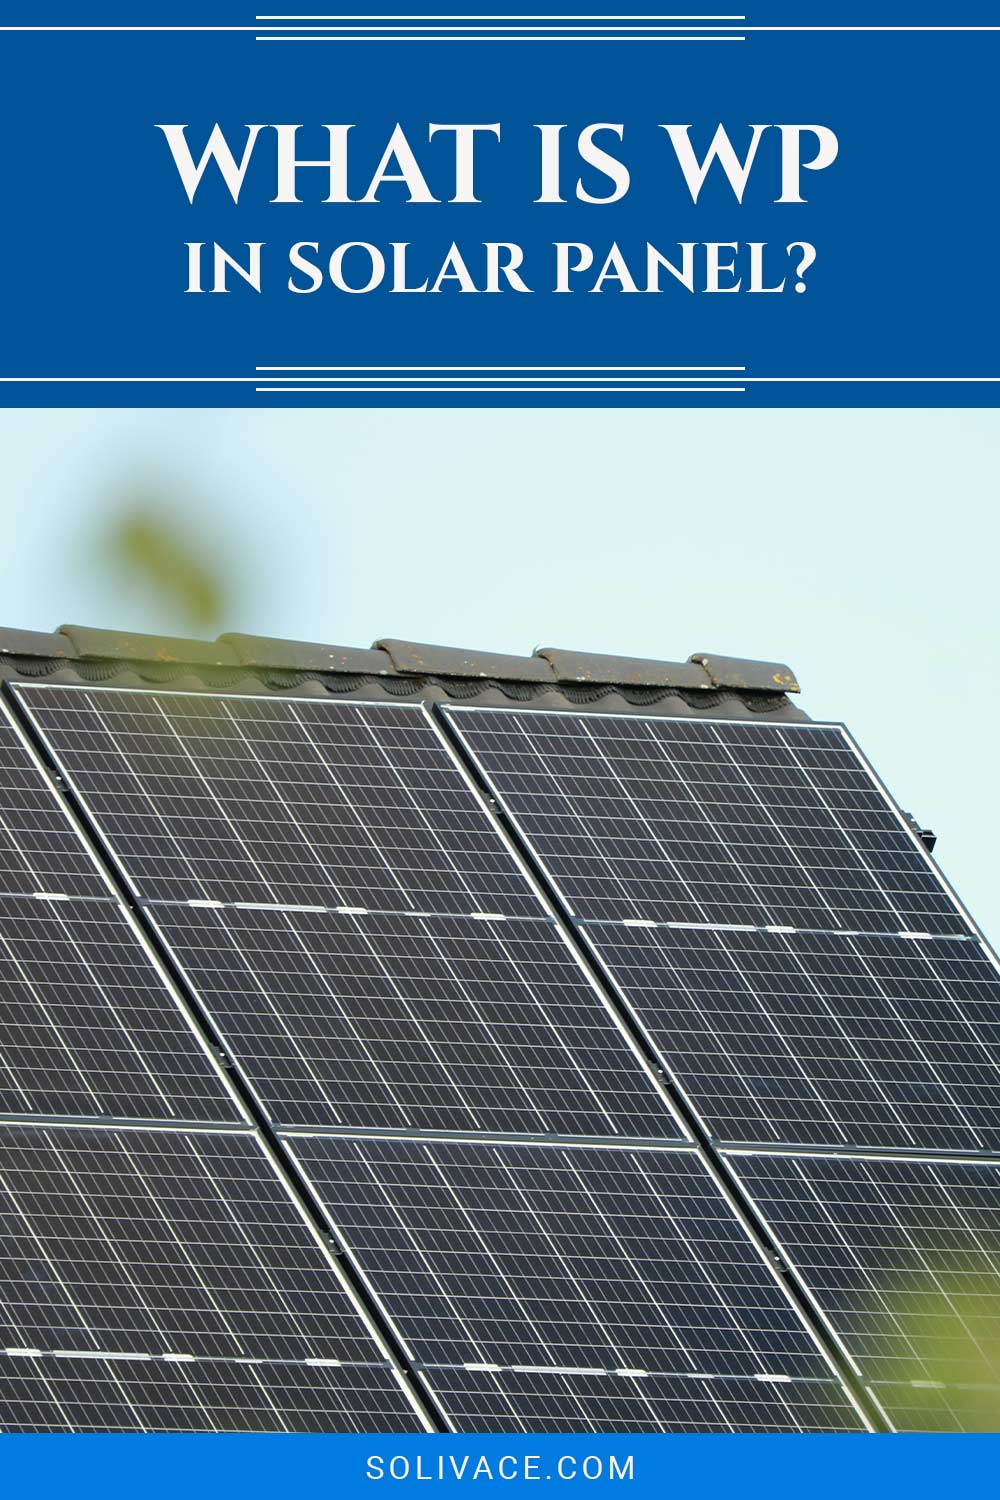 What is WP in Solar Panel?